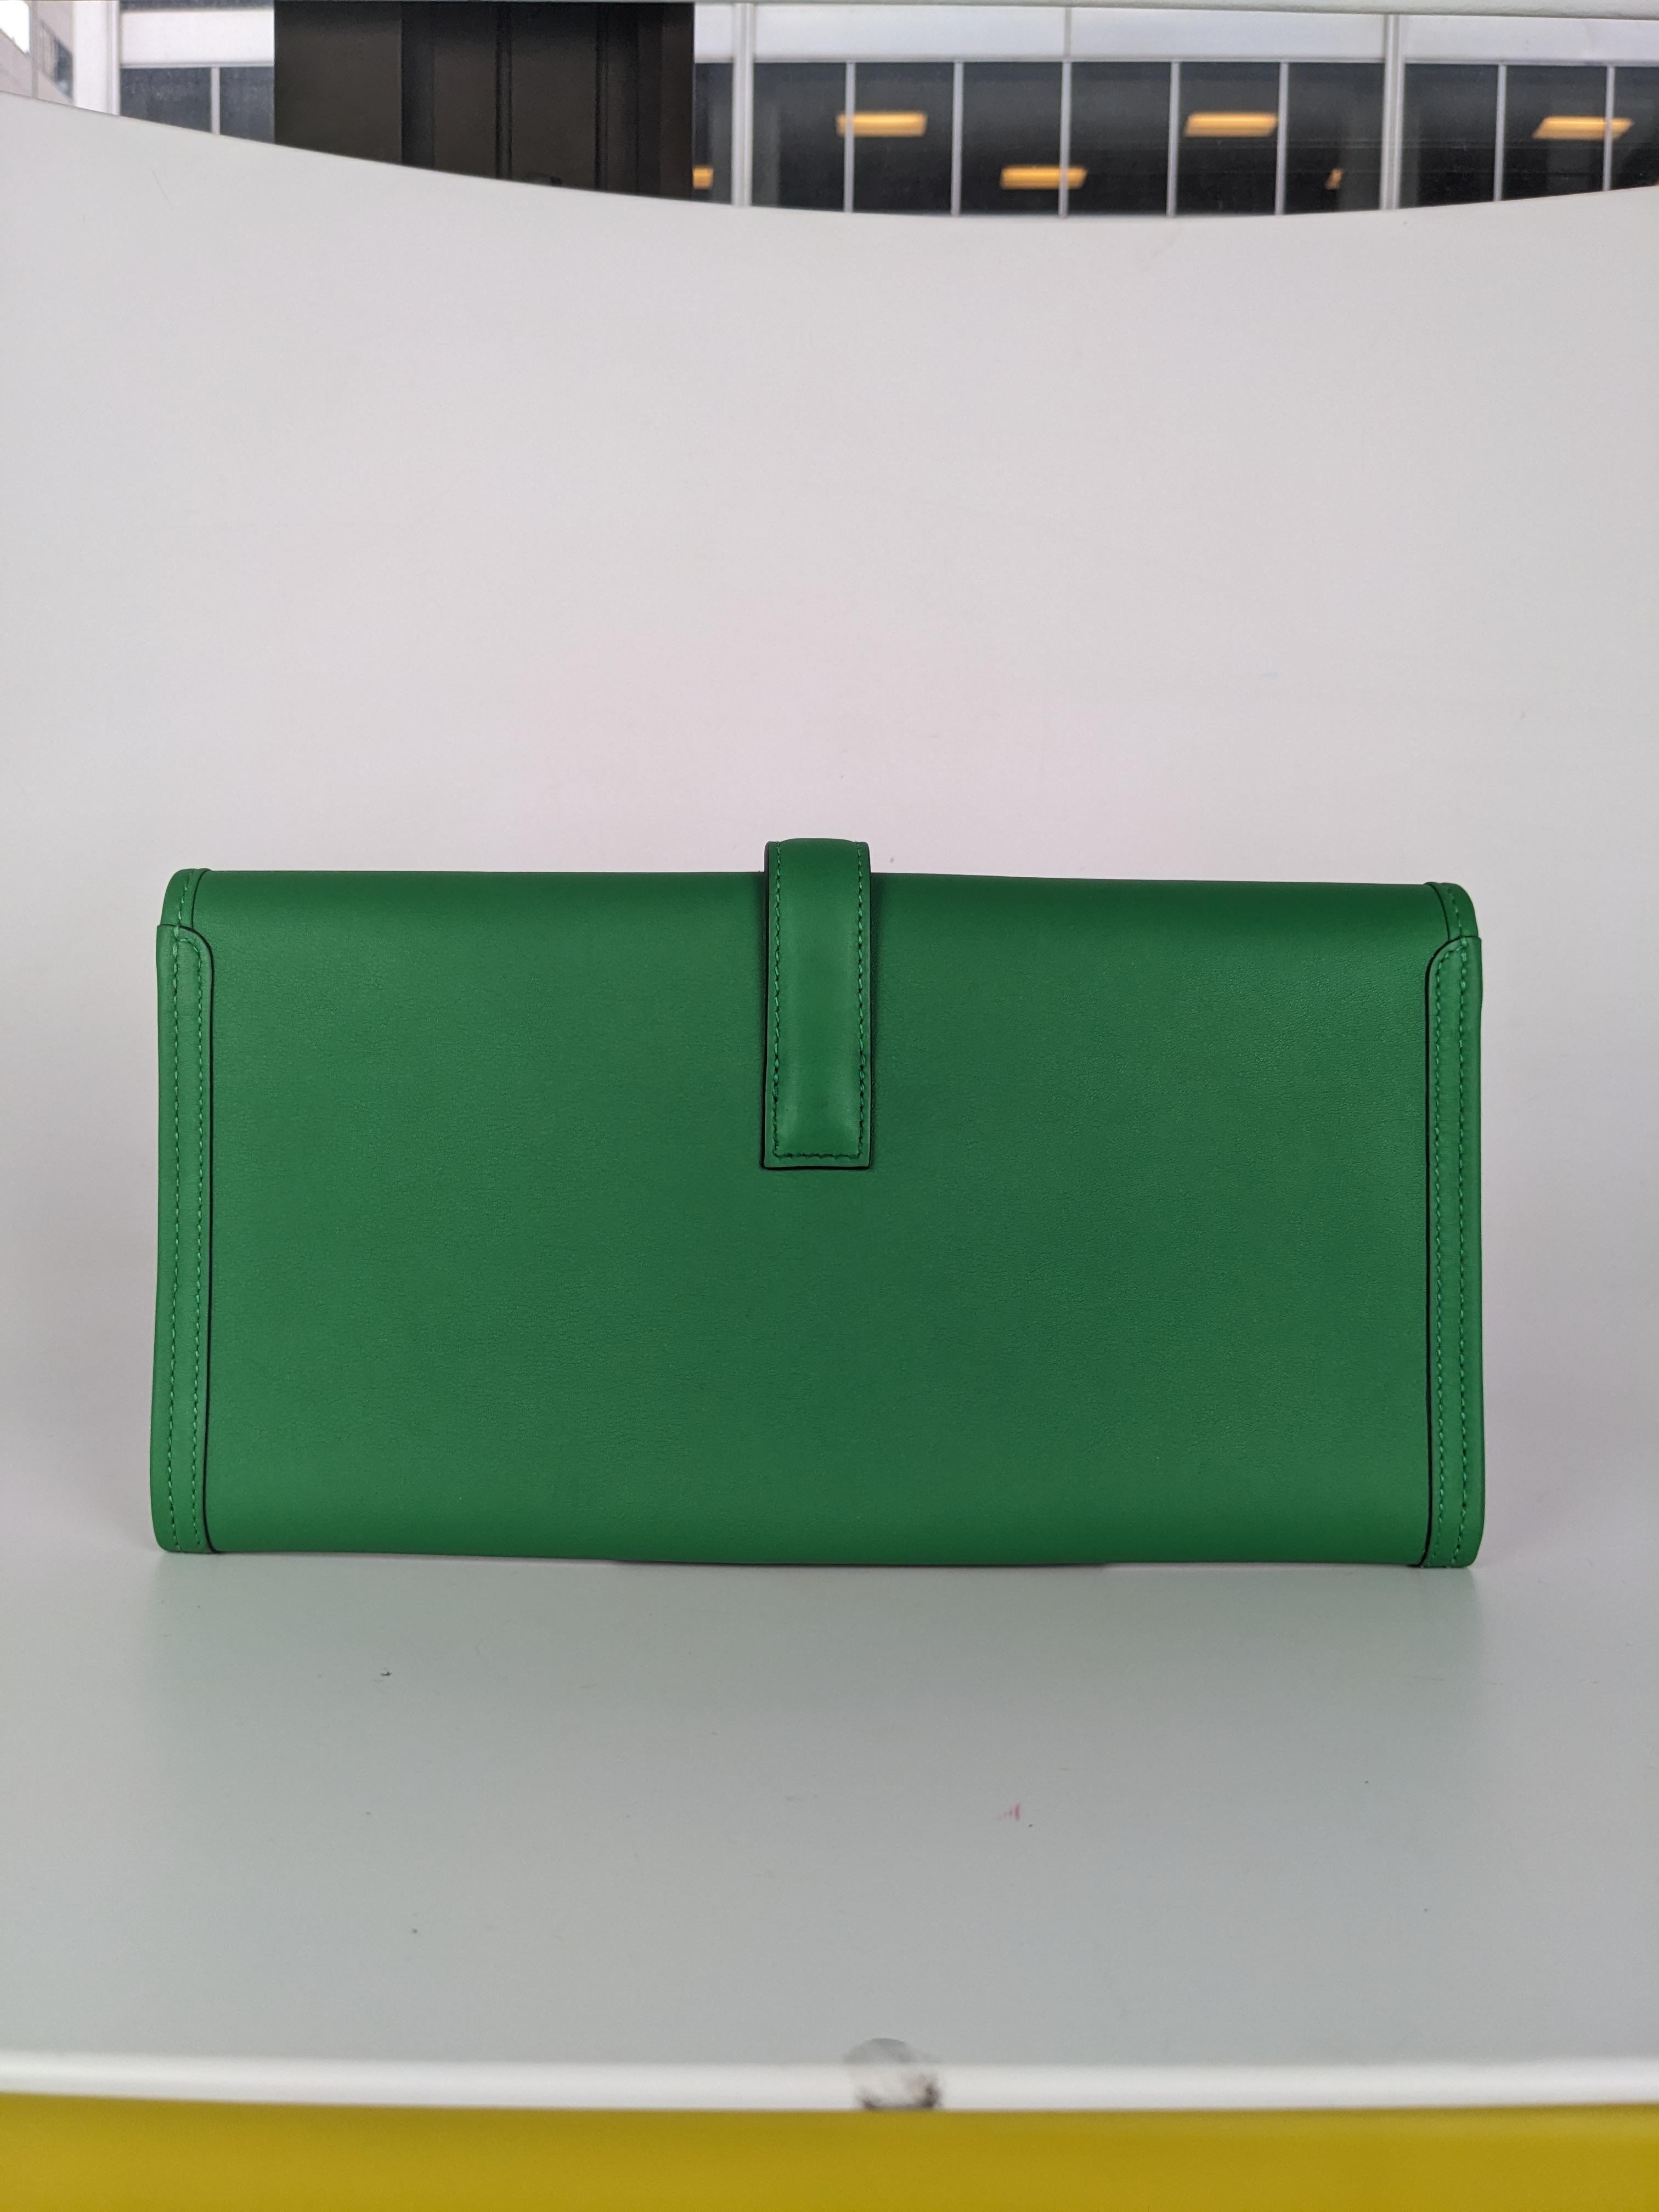 Condition: This authentic Hermes clutch is in great pre-loved condition. There are light marks and scratches on the interior and exterior.

No accessories included (dust bag, box, etc.)

Features: Cross-over flap and a strap that tucks under a